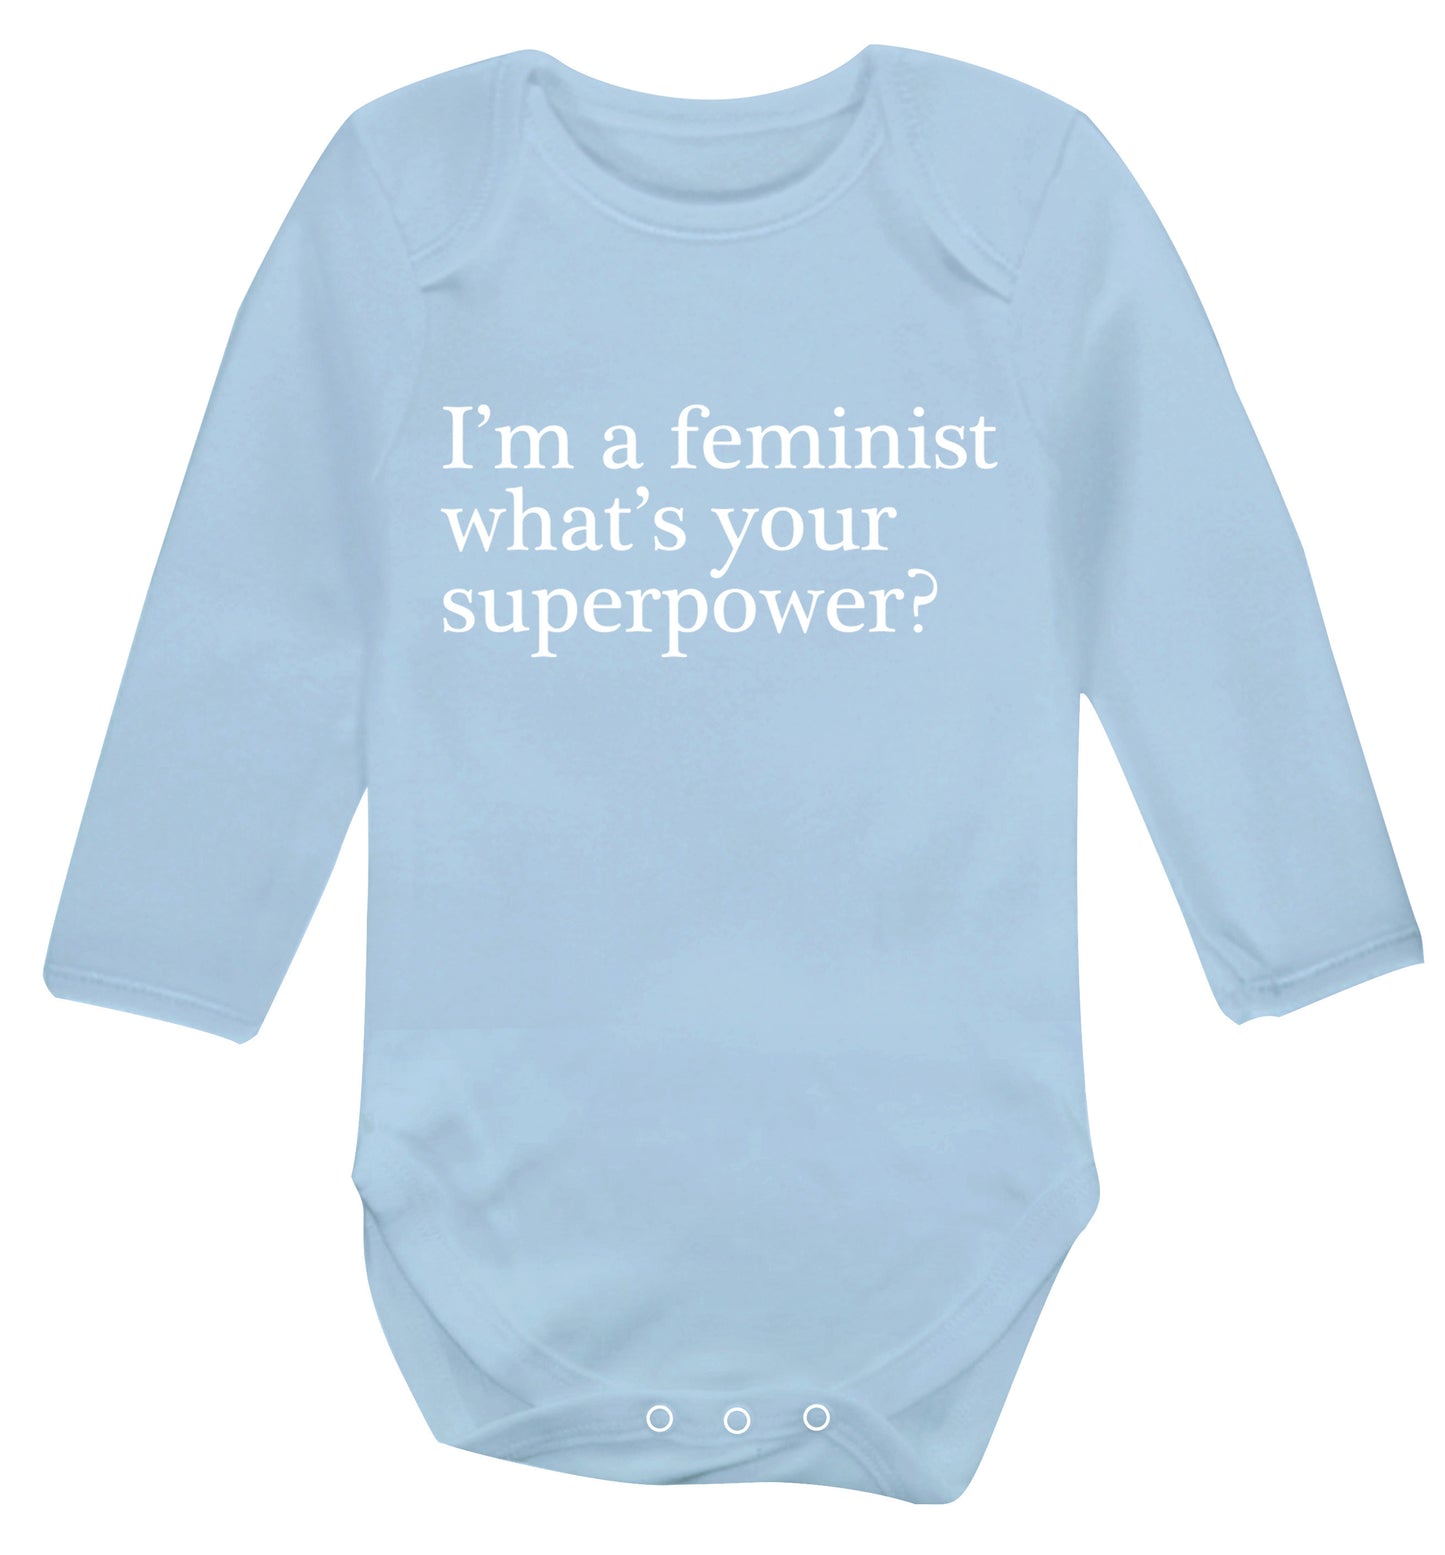 I'm a feminist what's your superpower? Baby Vest long sleeved pale blue 6-12 months